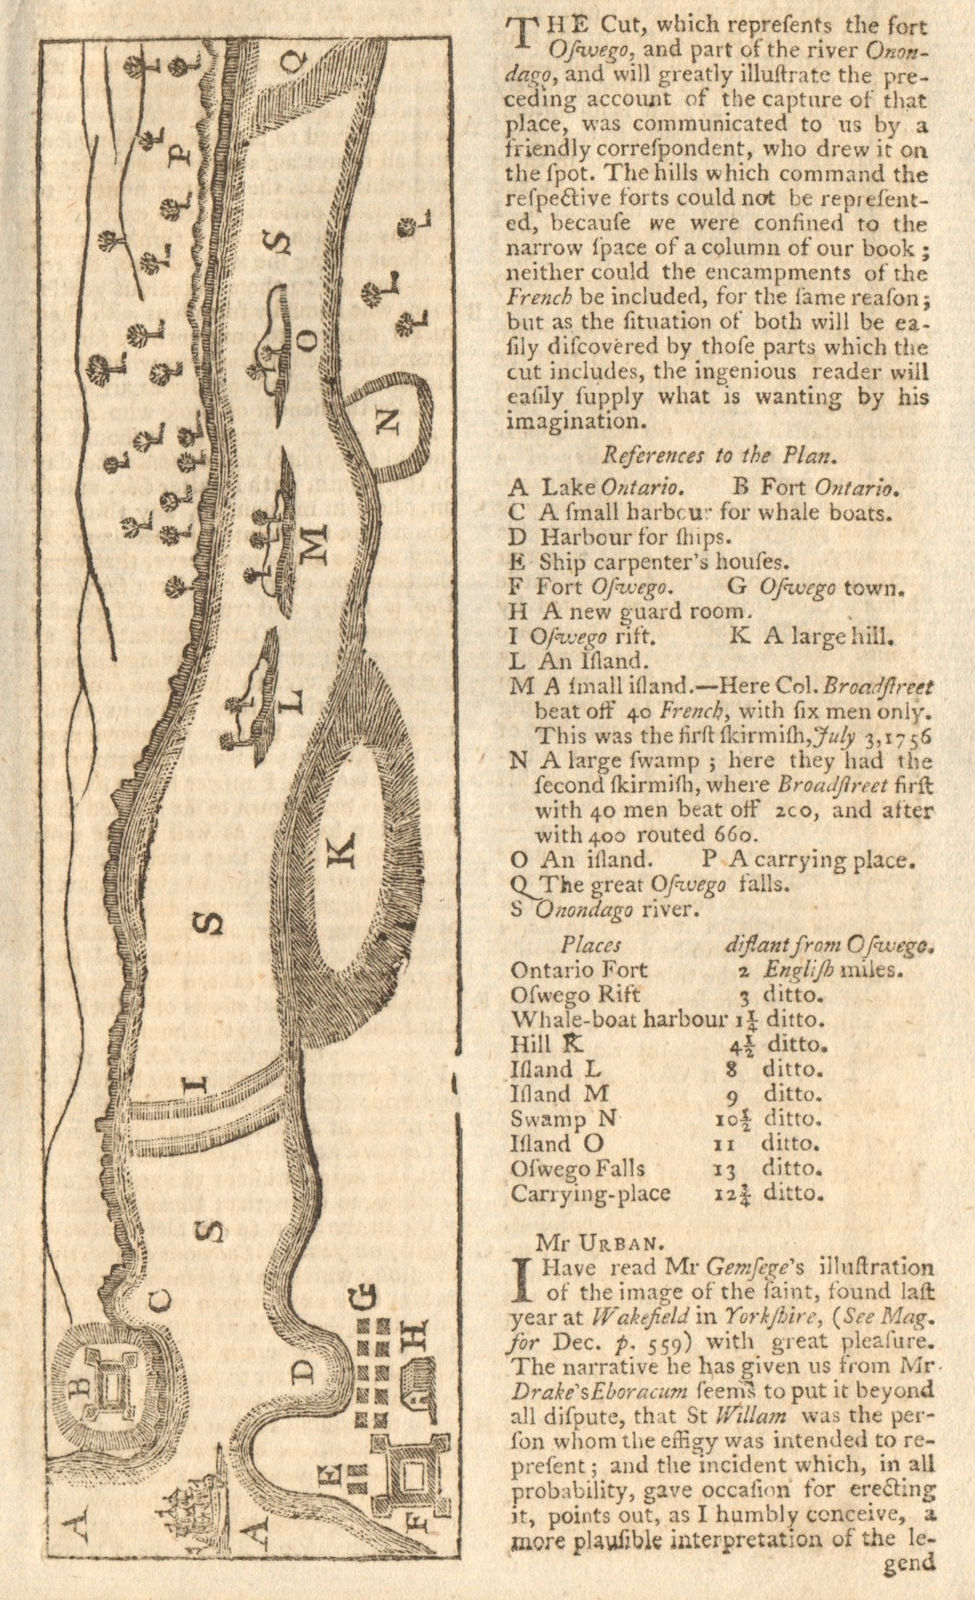 Associate Product Plan of the Forts Ontario & Oswego. River Onondago. New York. GENTS MAG 1757 map